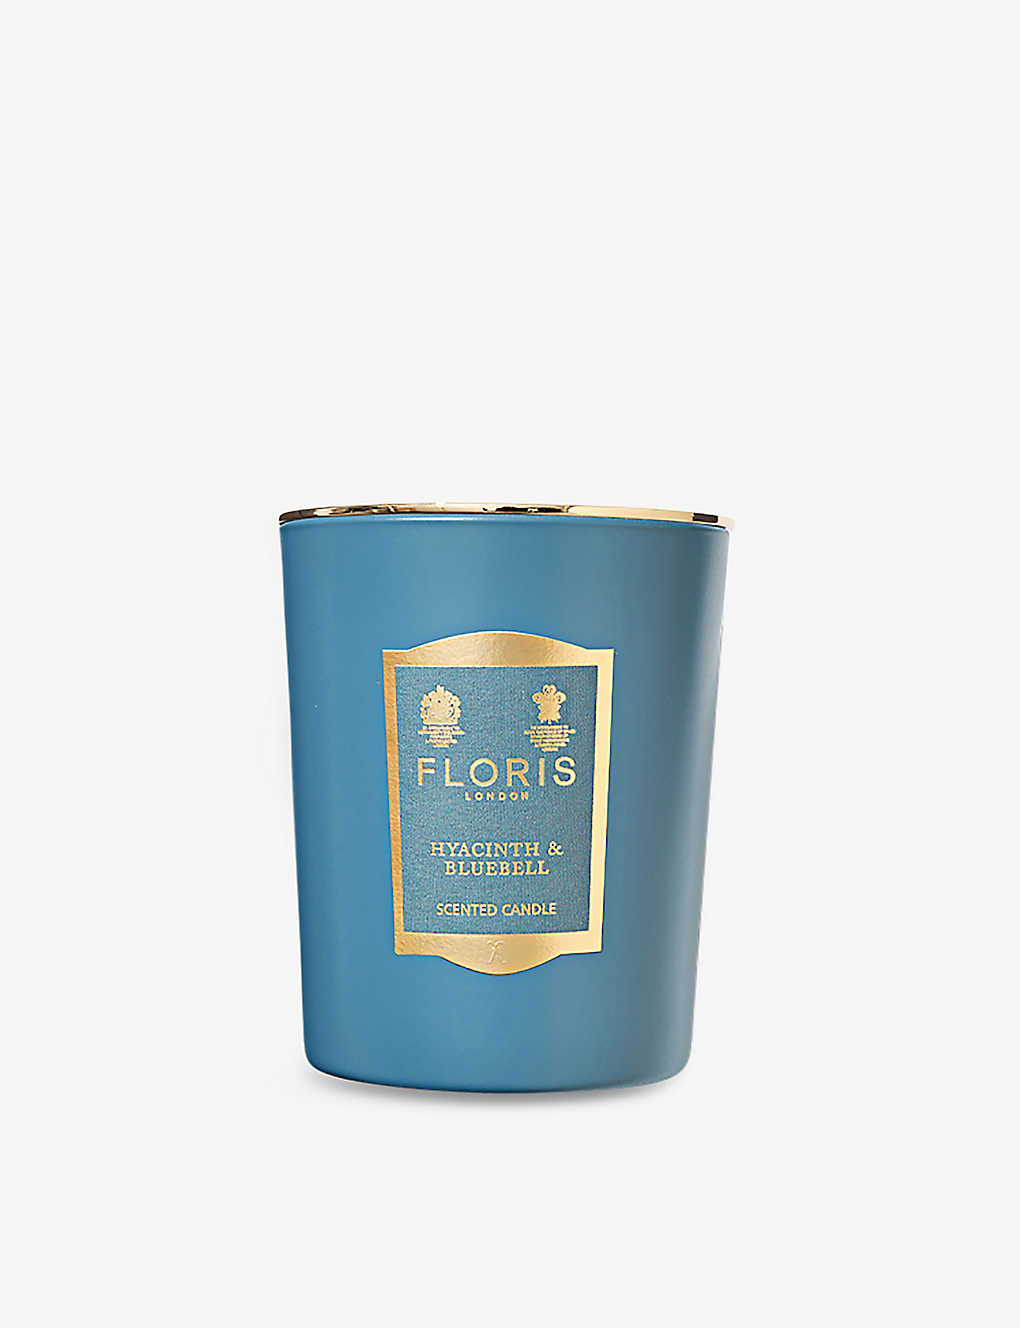 Floris London Hyacinth & Bluebell Scented Candle 500g